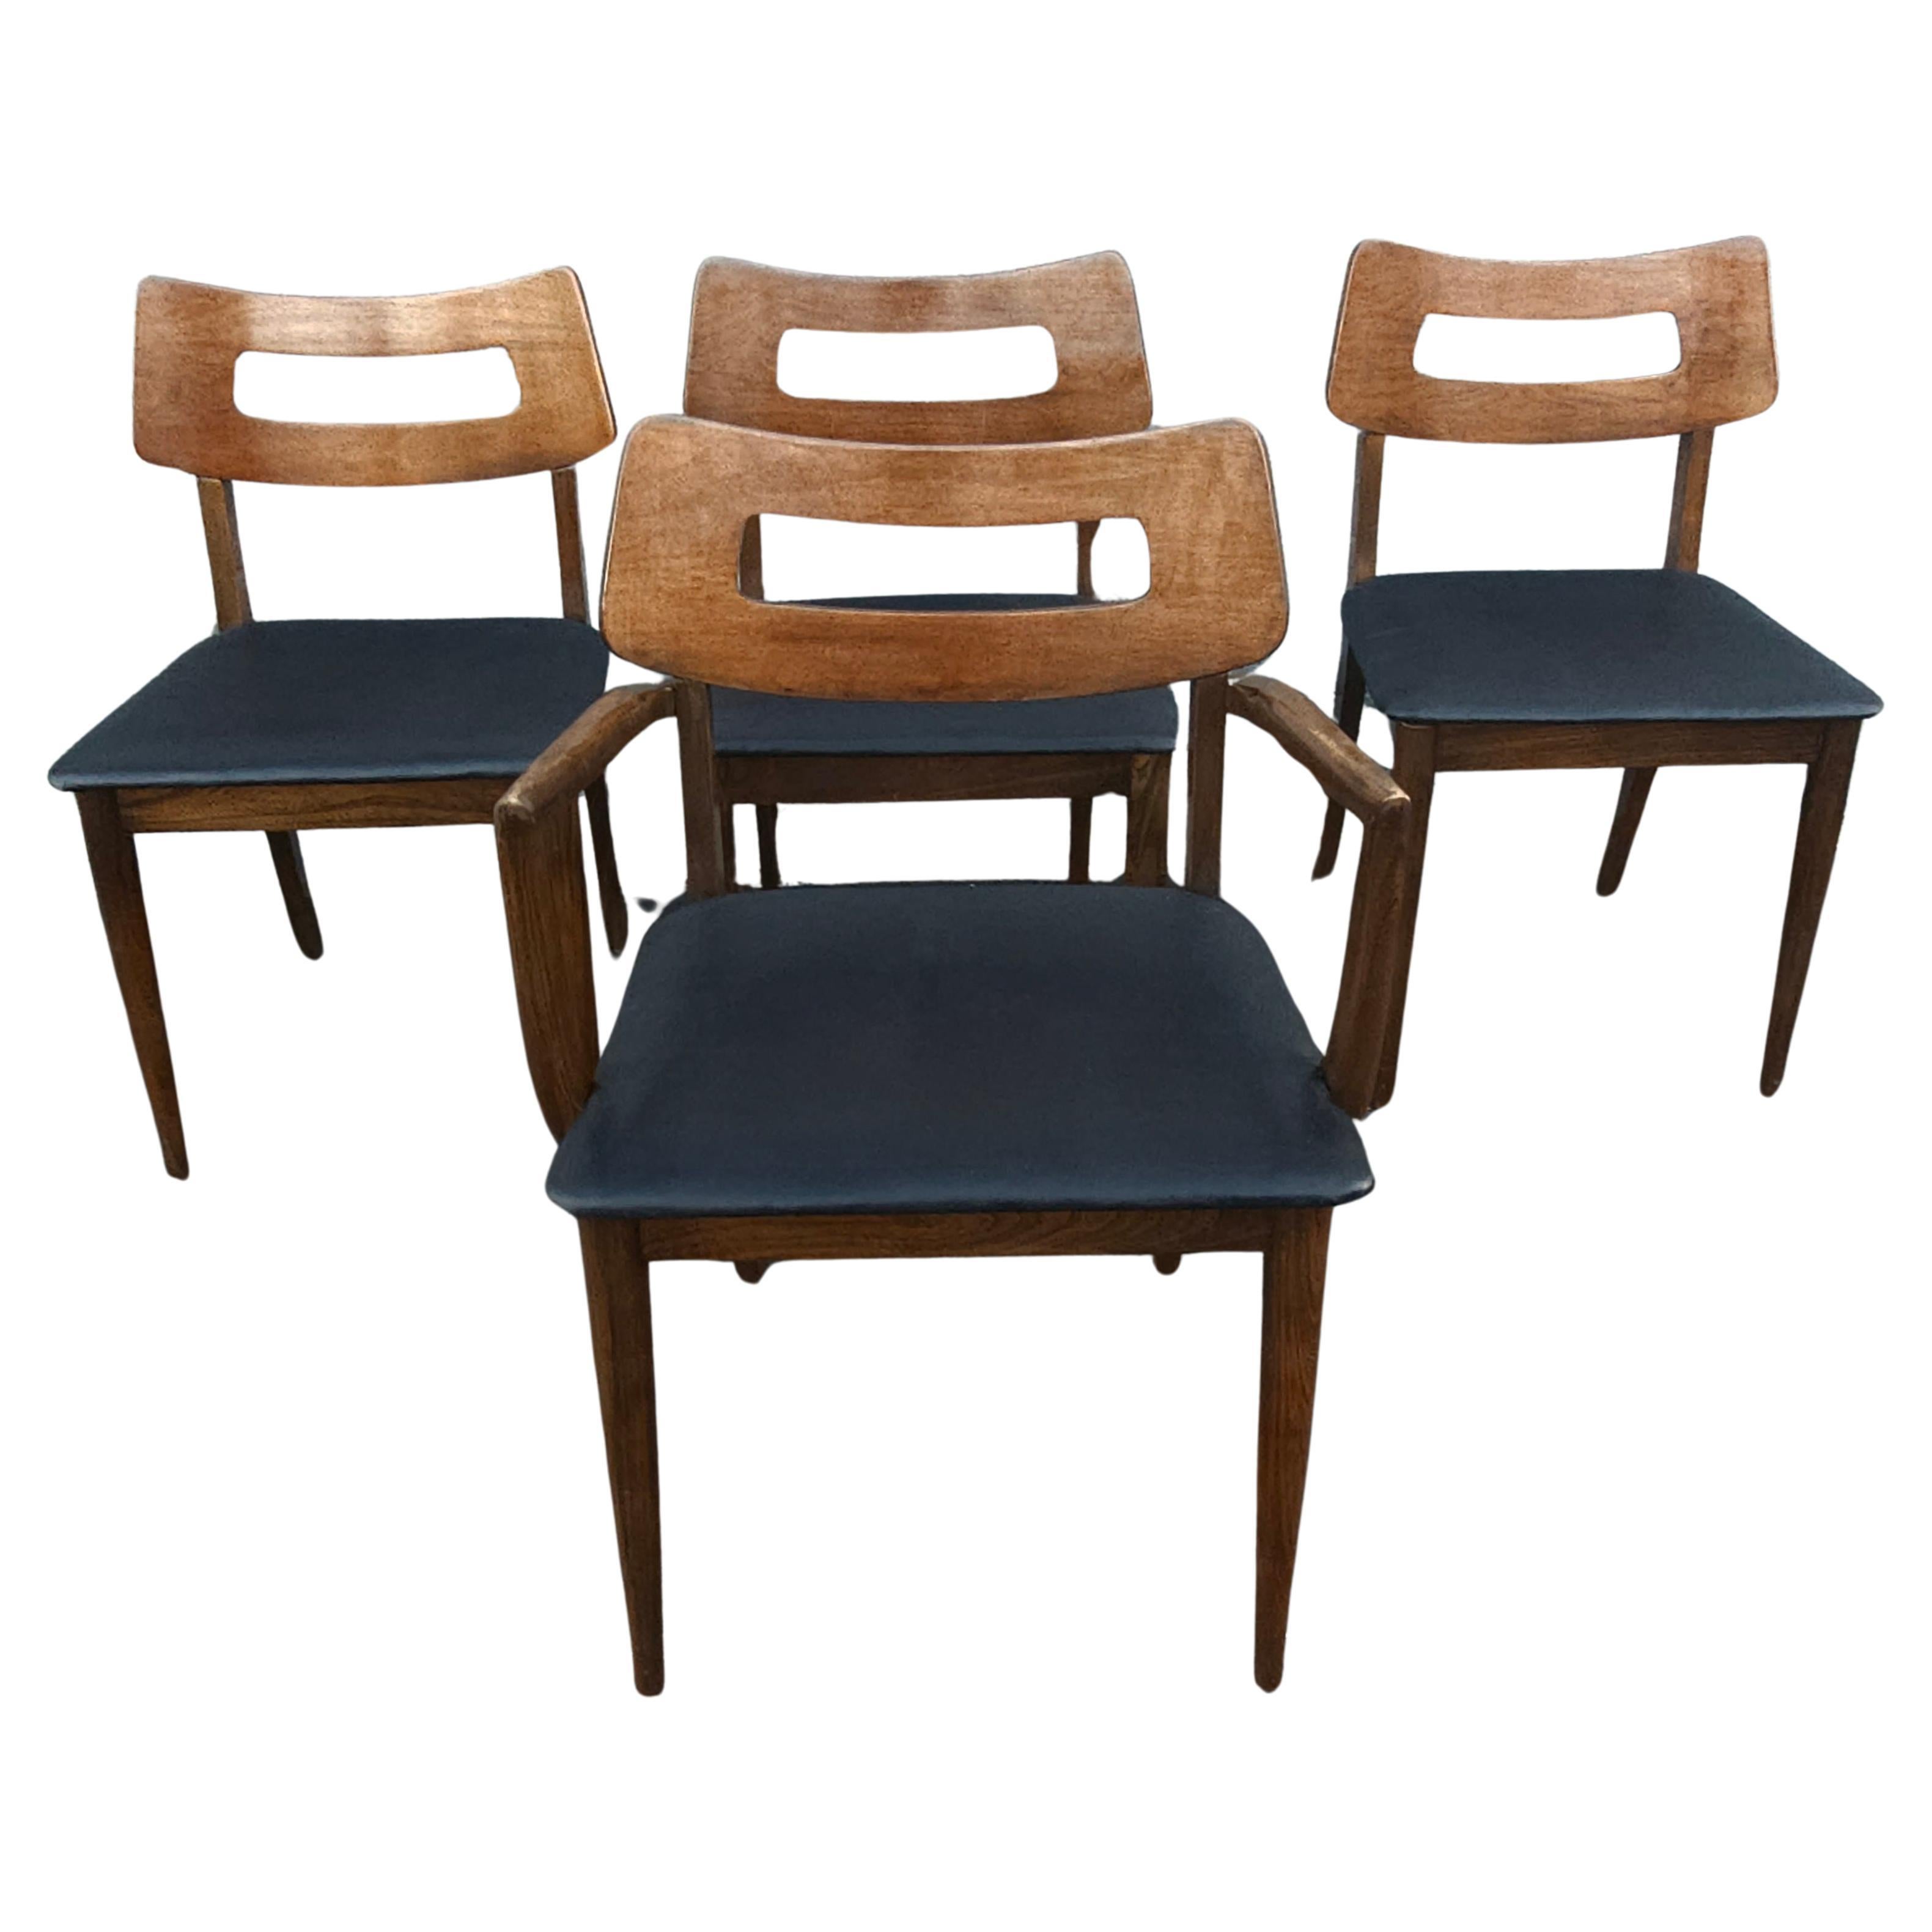 Set of 4 Mid Century Walnut and Vinyl Seat Upholstered Chairs